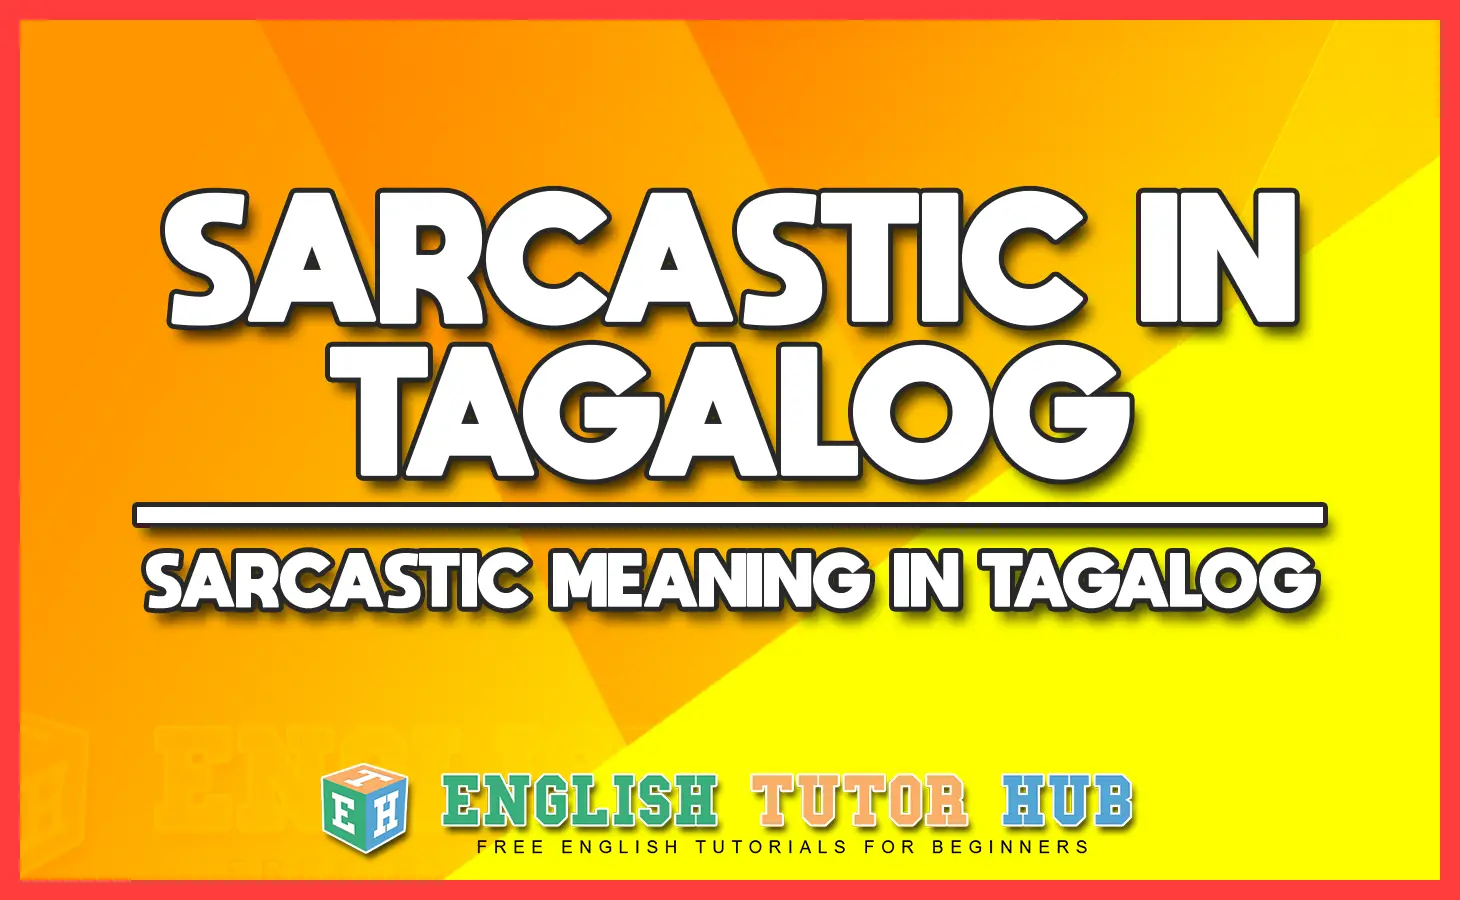 Sarcastic In Tagalog - Sarcastic Meaning In Tagalog